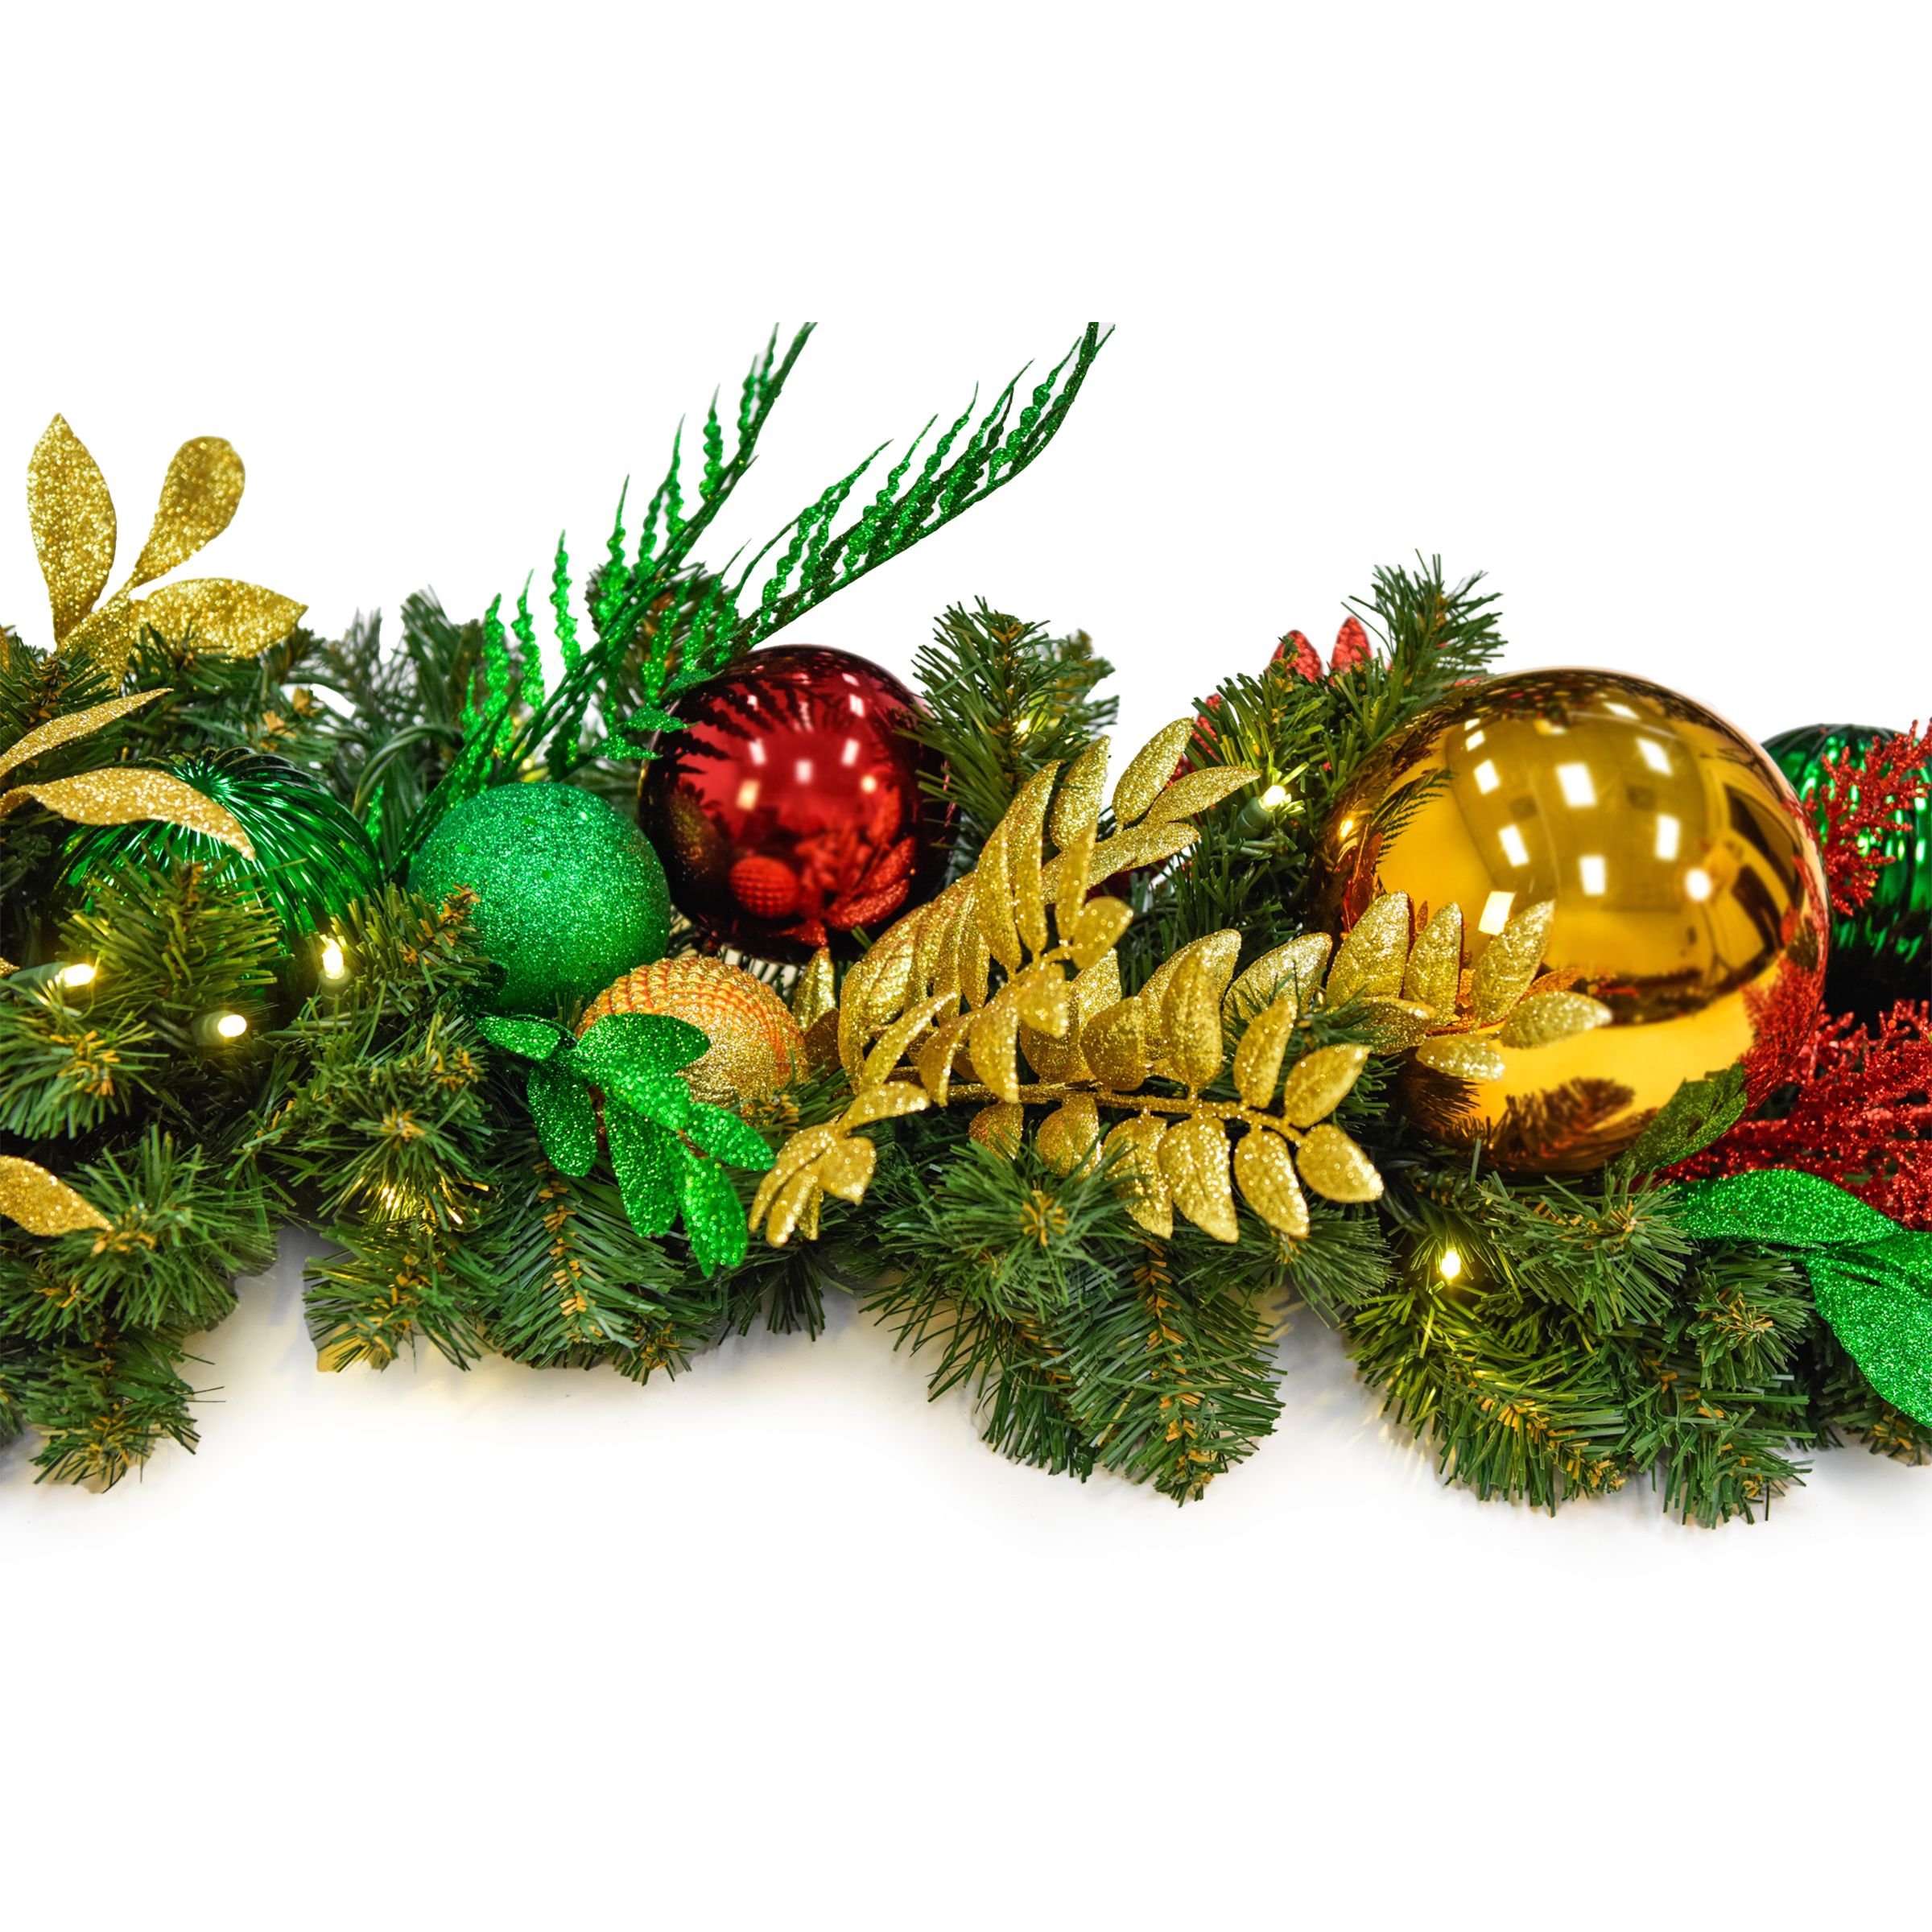 Gold, green, & red pre-decorated Christmas garland